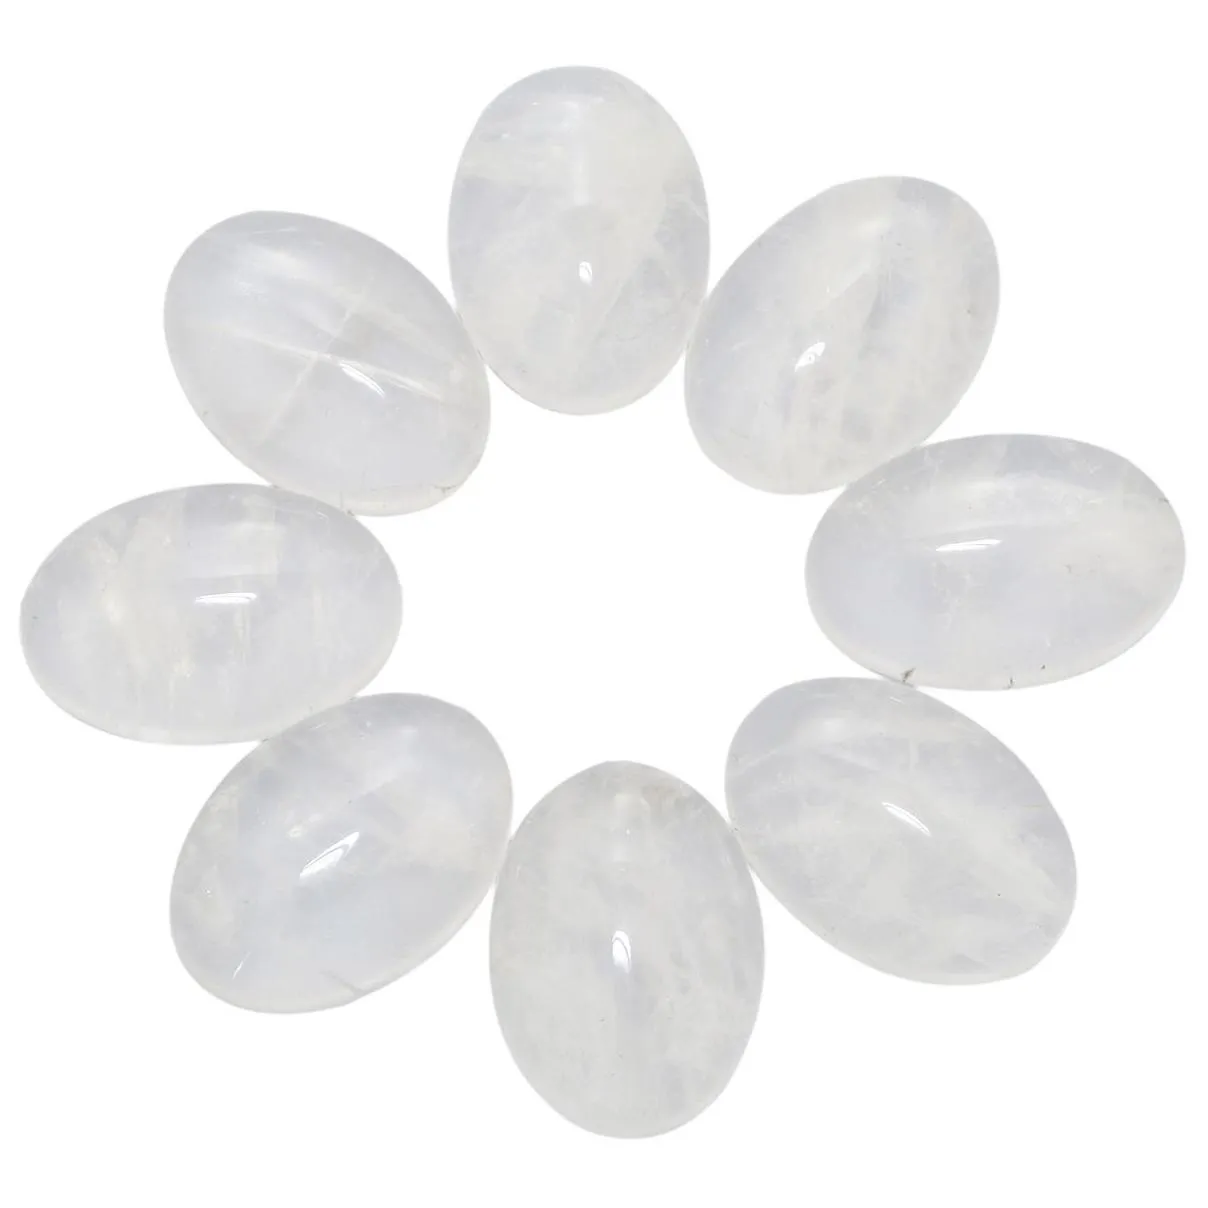 Natural Quartz Crystal Oval Flat Back Gemstone Cabochons Healing Chakra Stone Bead Cab Covers No Hole for Jewelry Craft Making